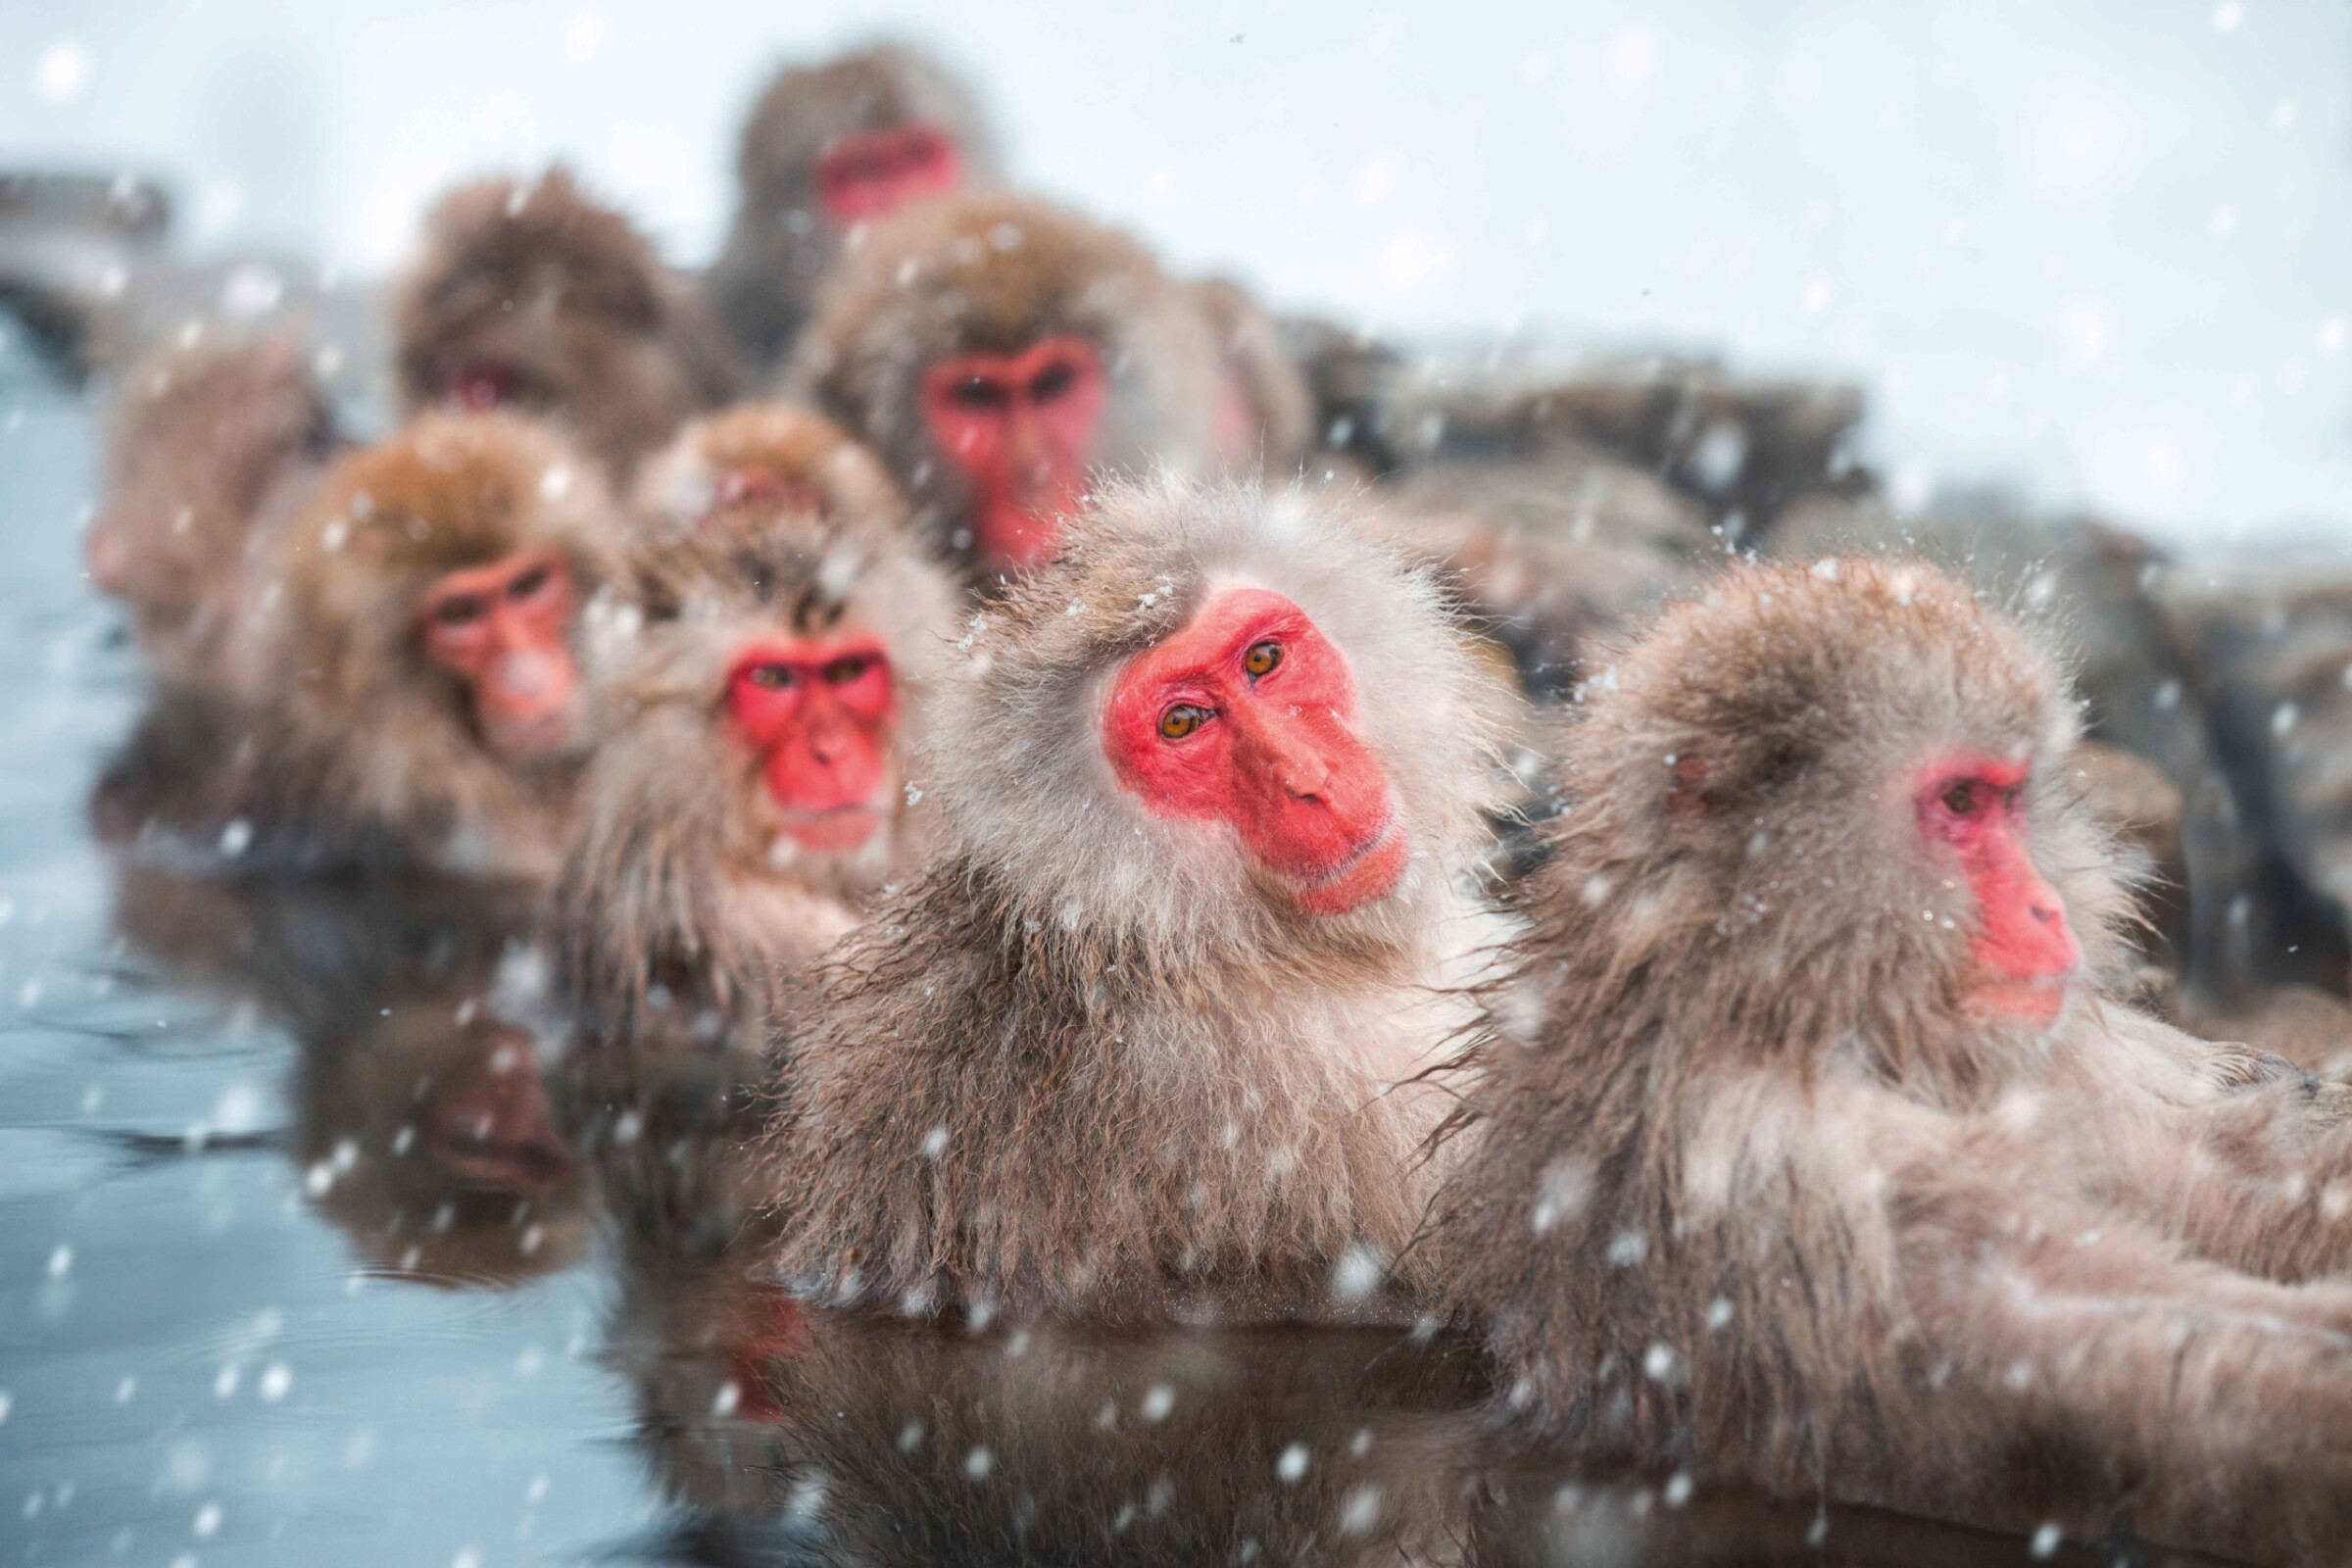 Letting off steam – a group of snow monkeys enjoying the hot springs in volcano-rich Japan